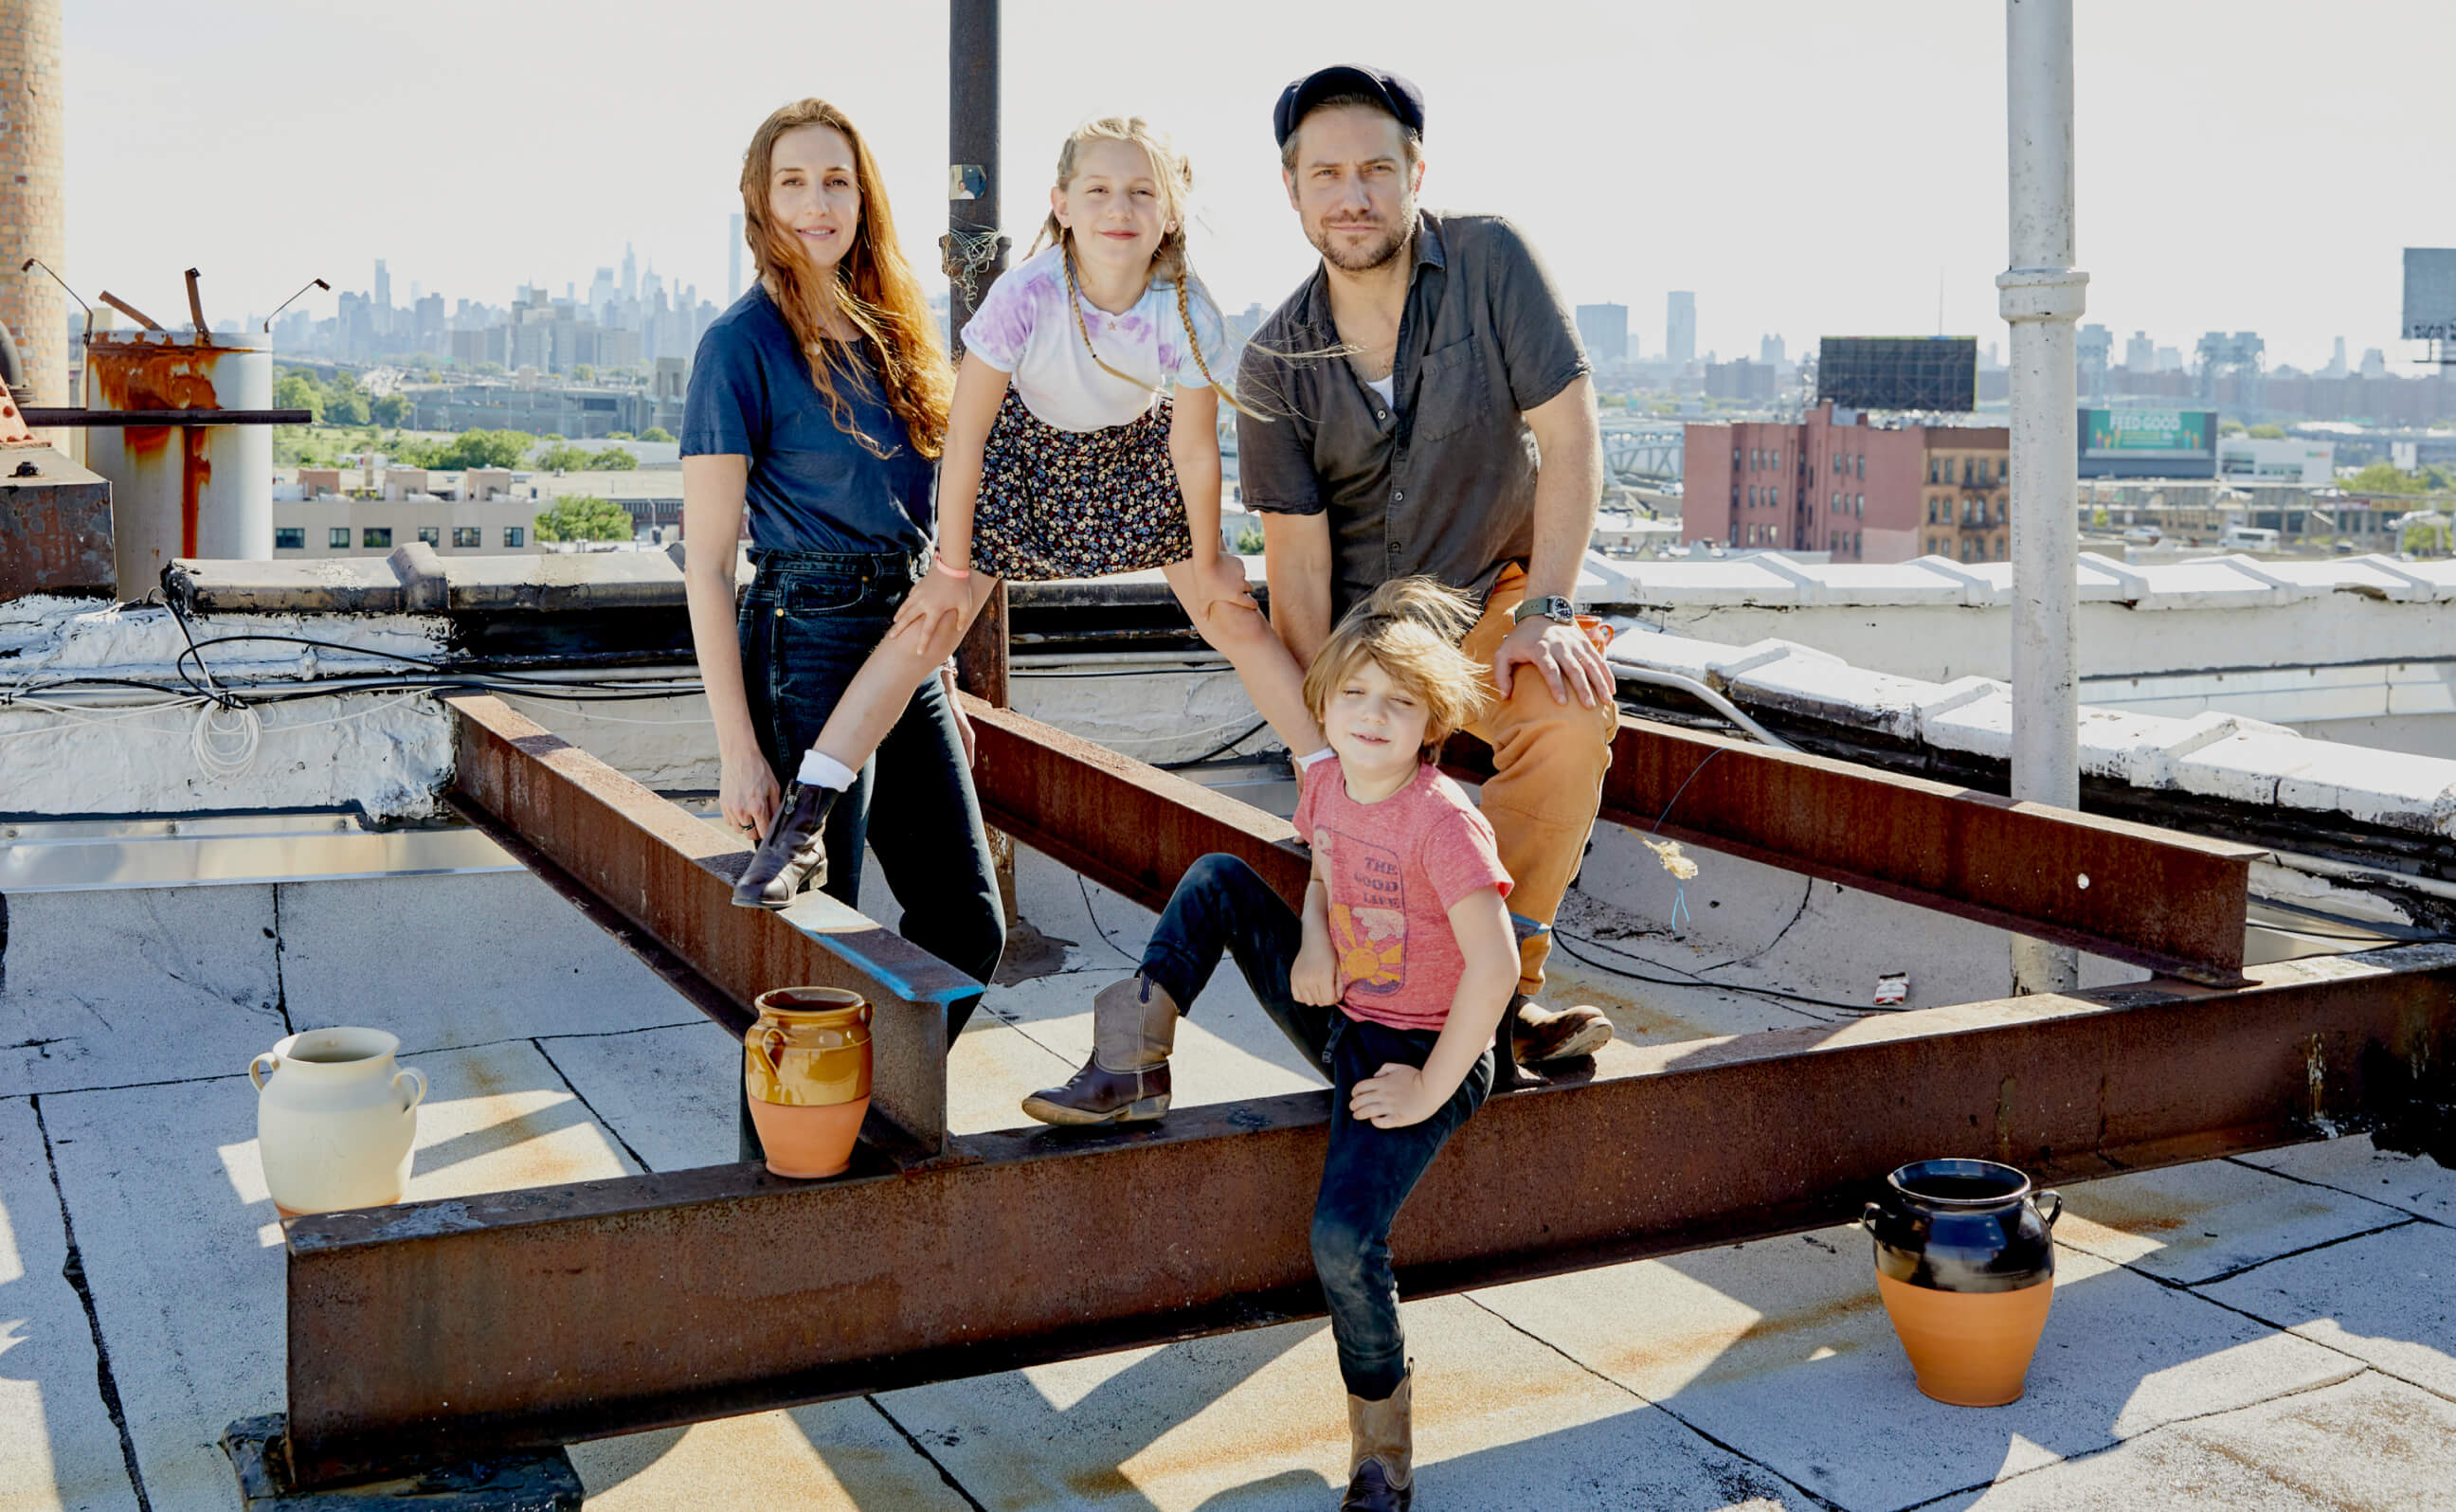 William Reardon and his family on rooftop